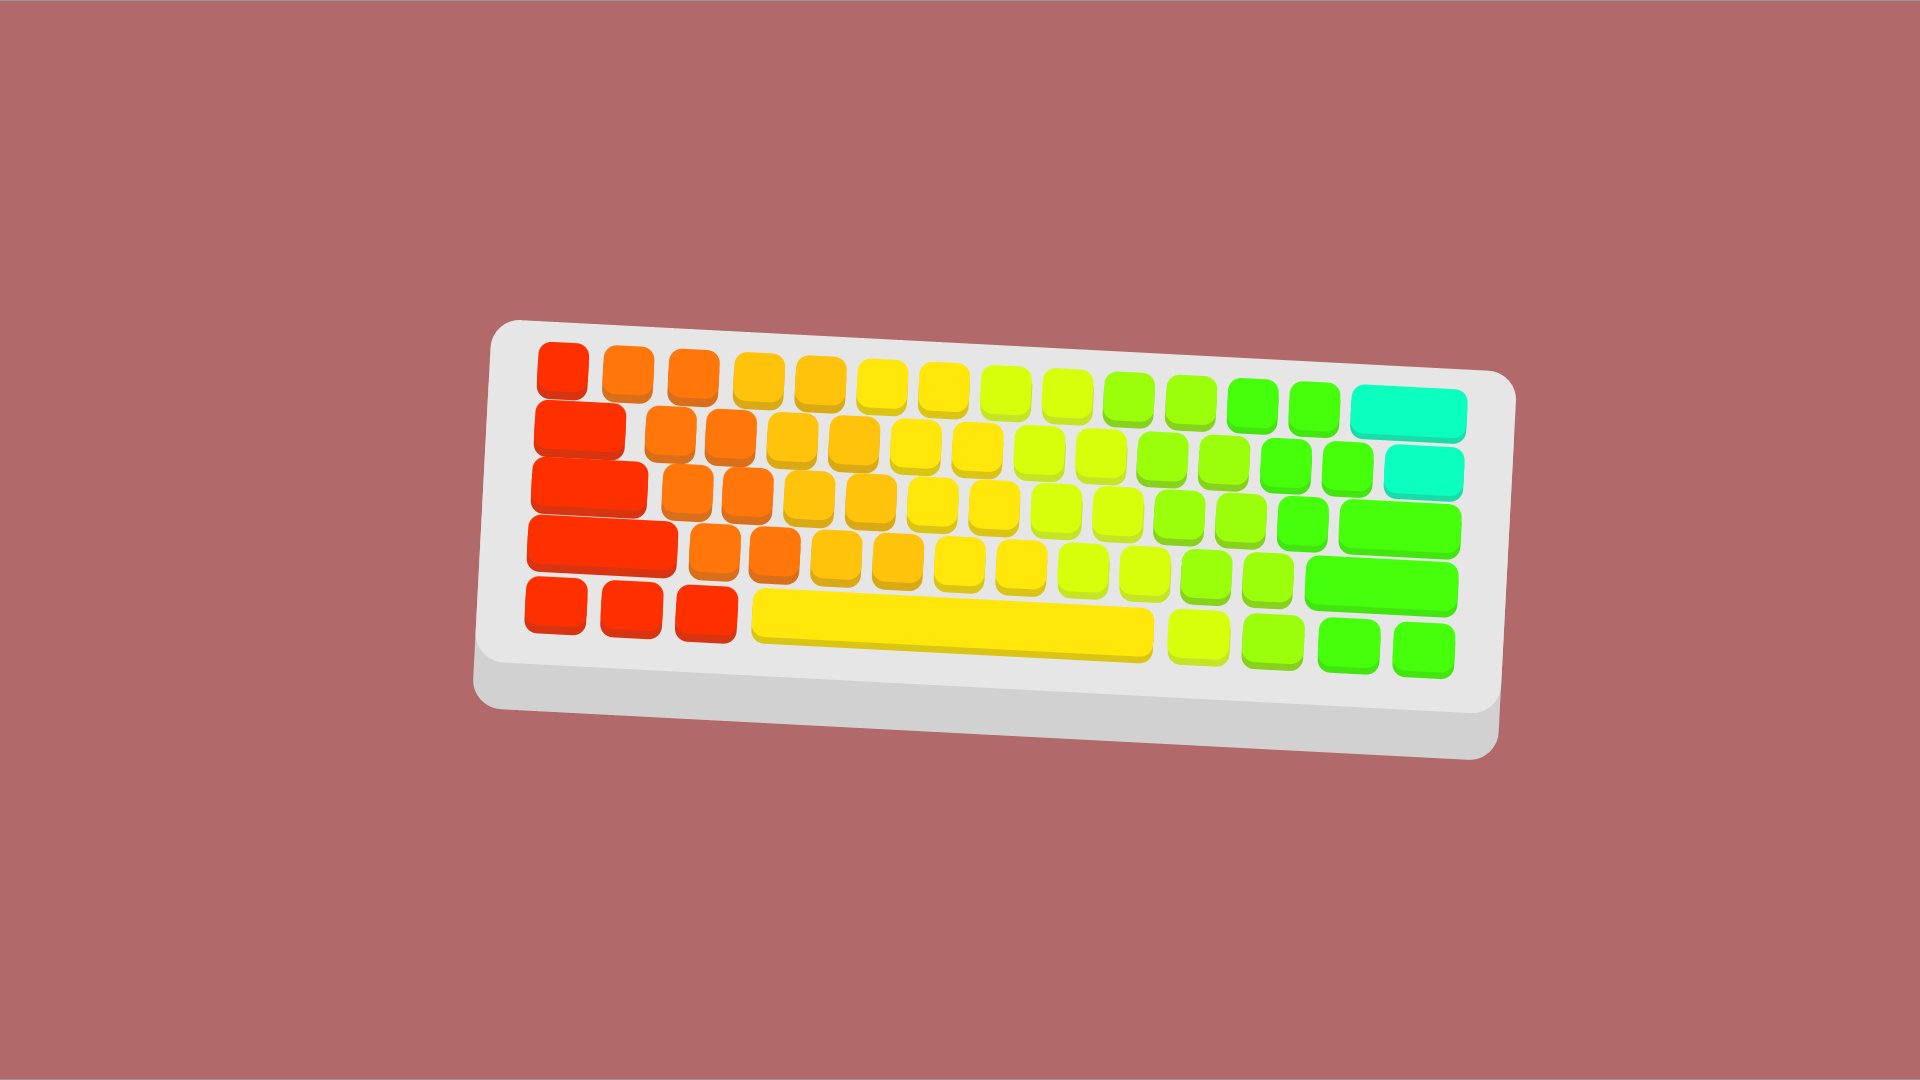 keyboard wallpapers 4k for your phone and desktop screen